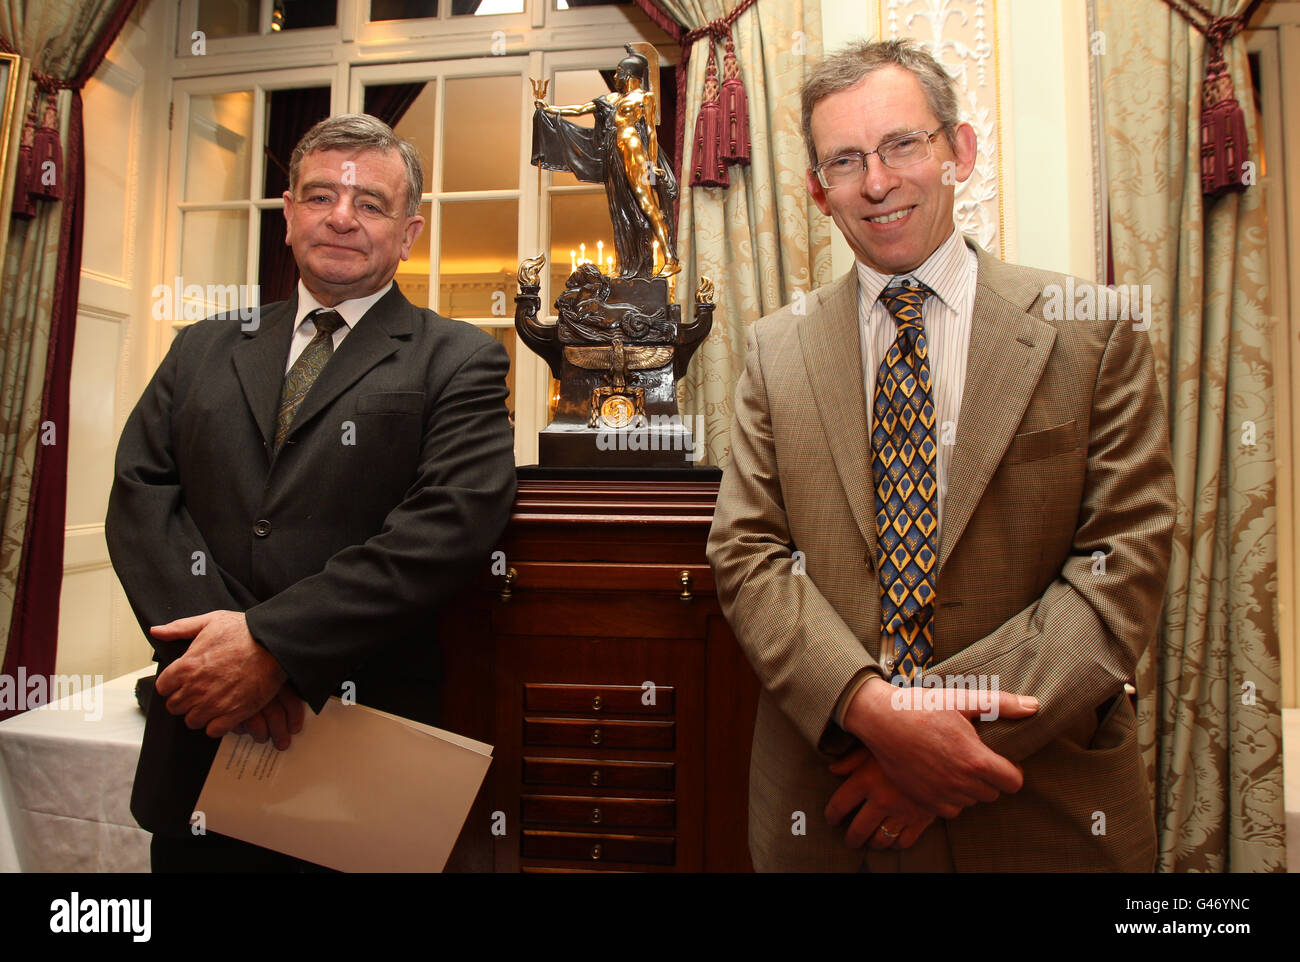 Former winner of the Segrave Trophy in 1998 Brian Milton the Journalist and Microlight pilot (left) and Dr William Brooks (right) at the Royal Automobile Club. Stock Photo